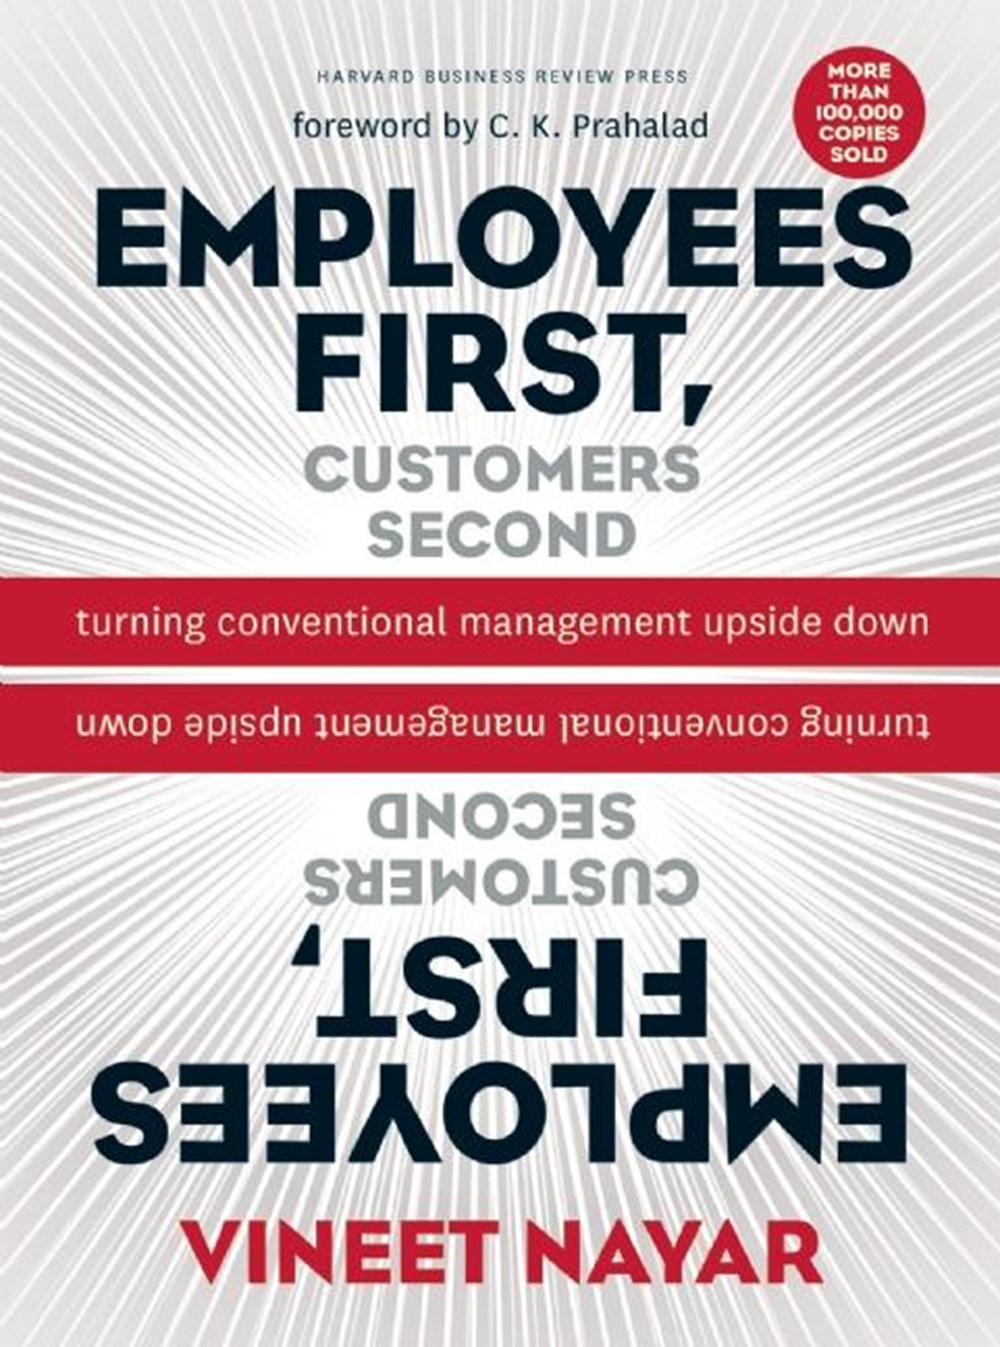 Employees First, Customers Second Turning Conventional Management Upside Down